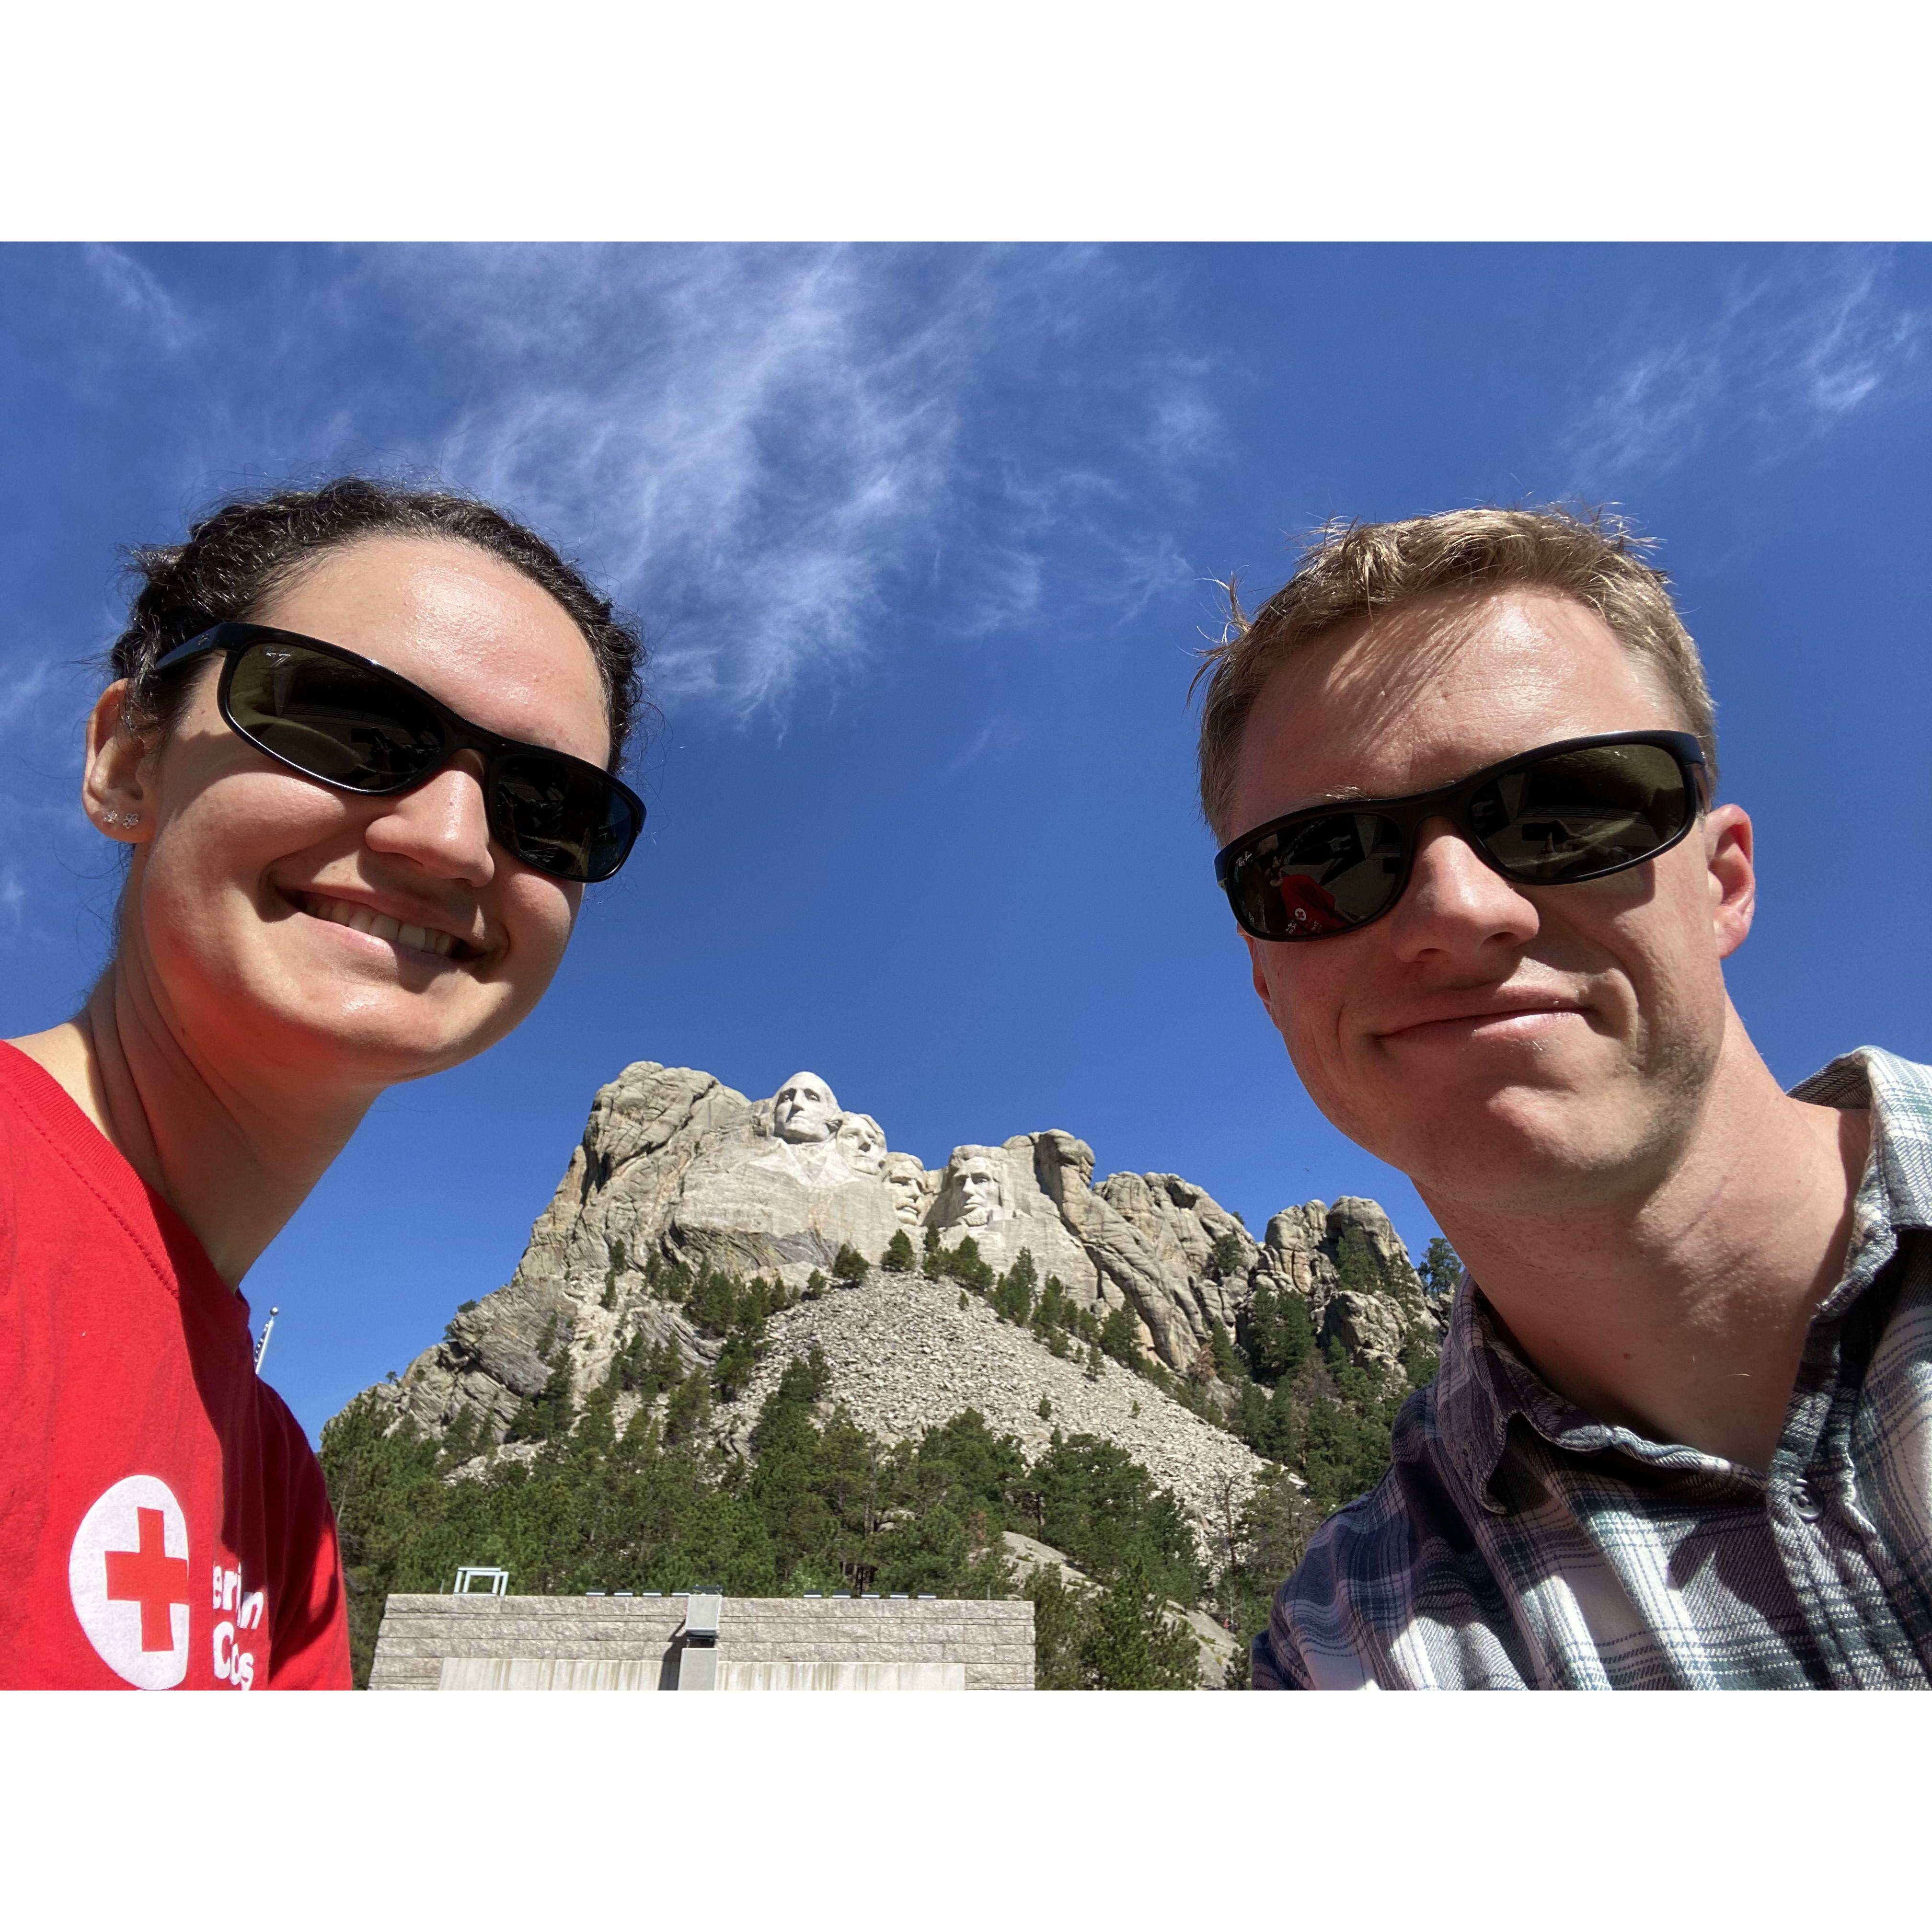 A trip to Mt Rushmore